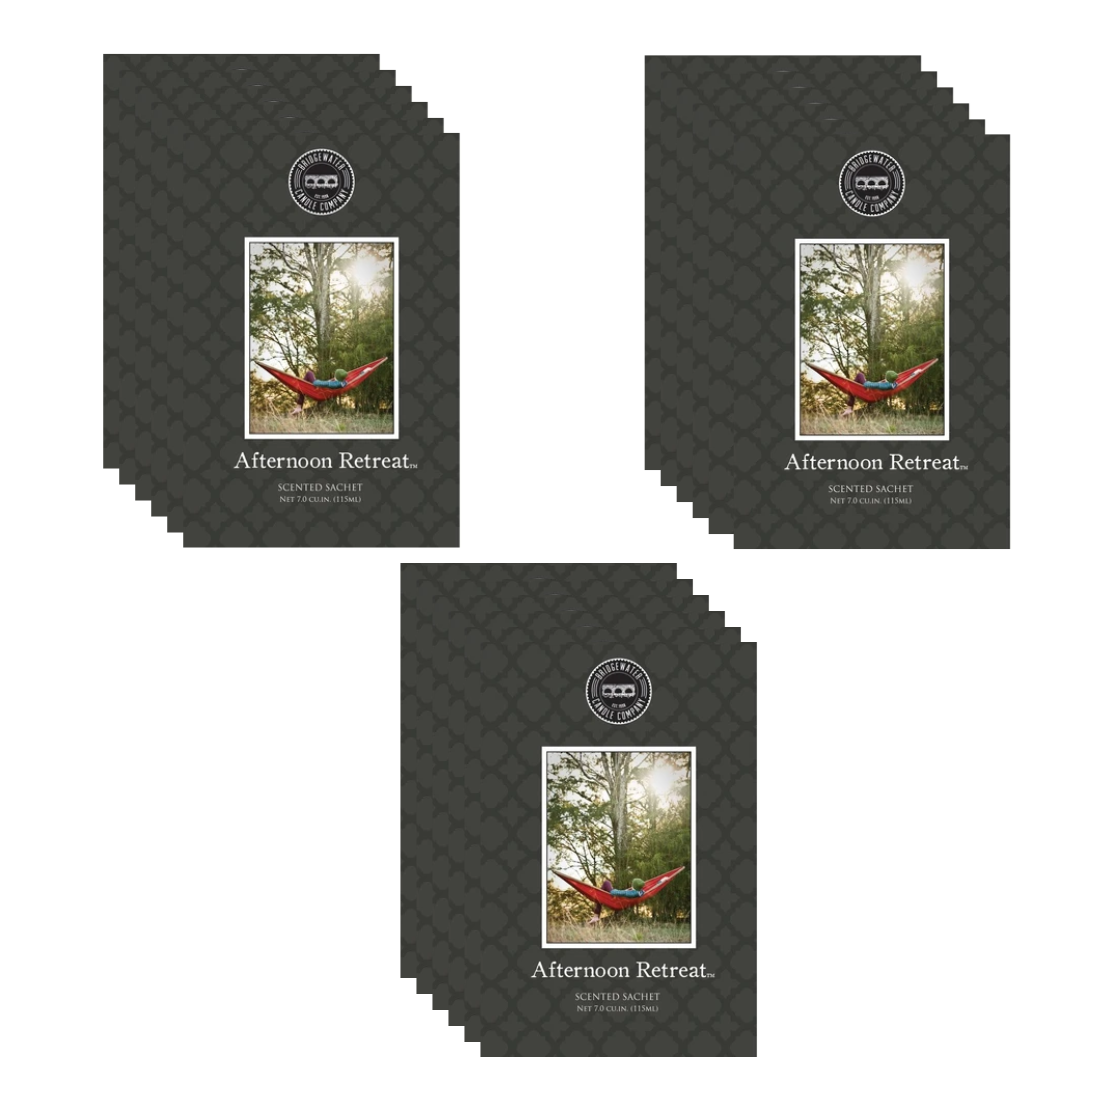 Large Scented Sachets - Bridgewater - Afternoon Retreat (18 sachets)